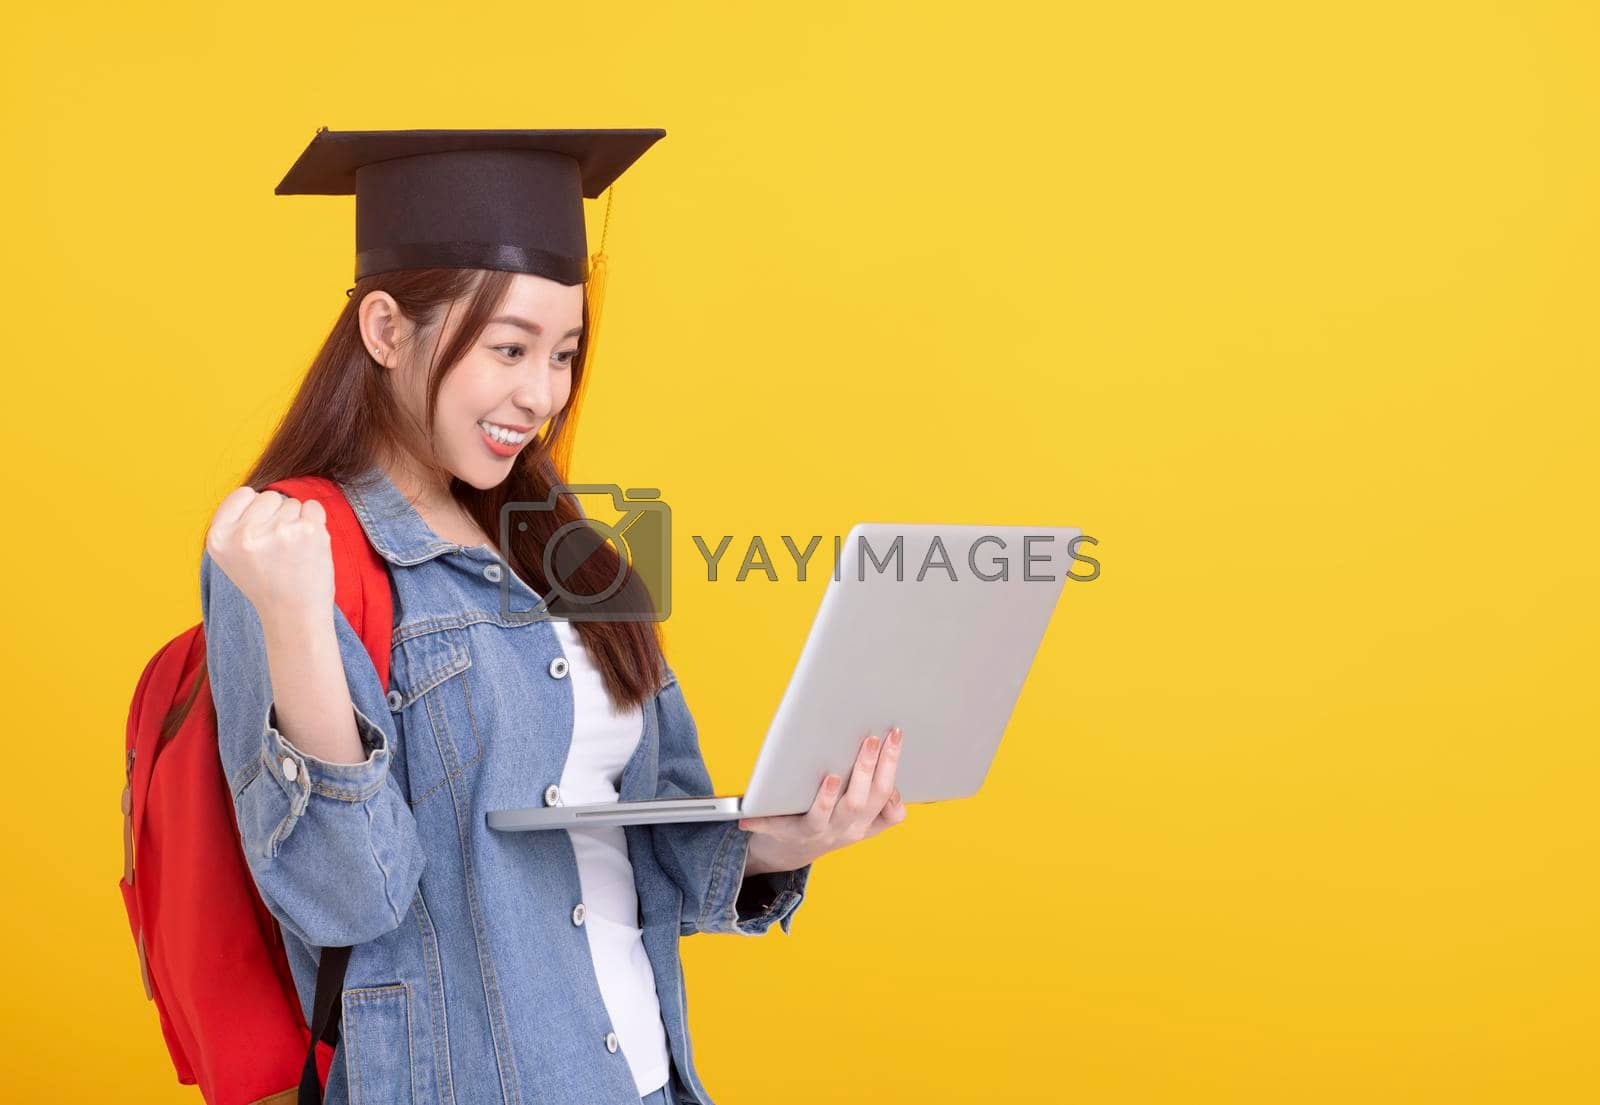 Royalty free image of Happy Asian girl college student in Graduation cap and holding laptop by tomwang